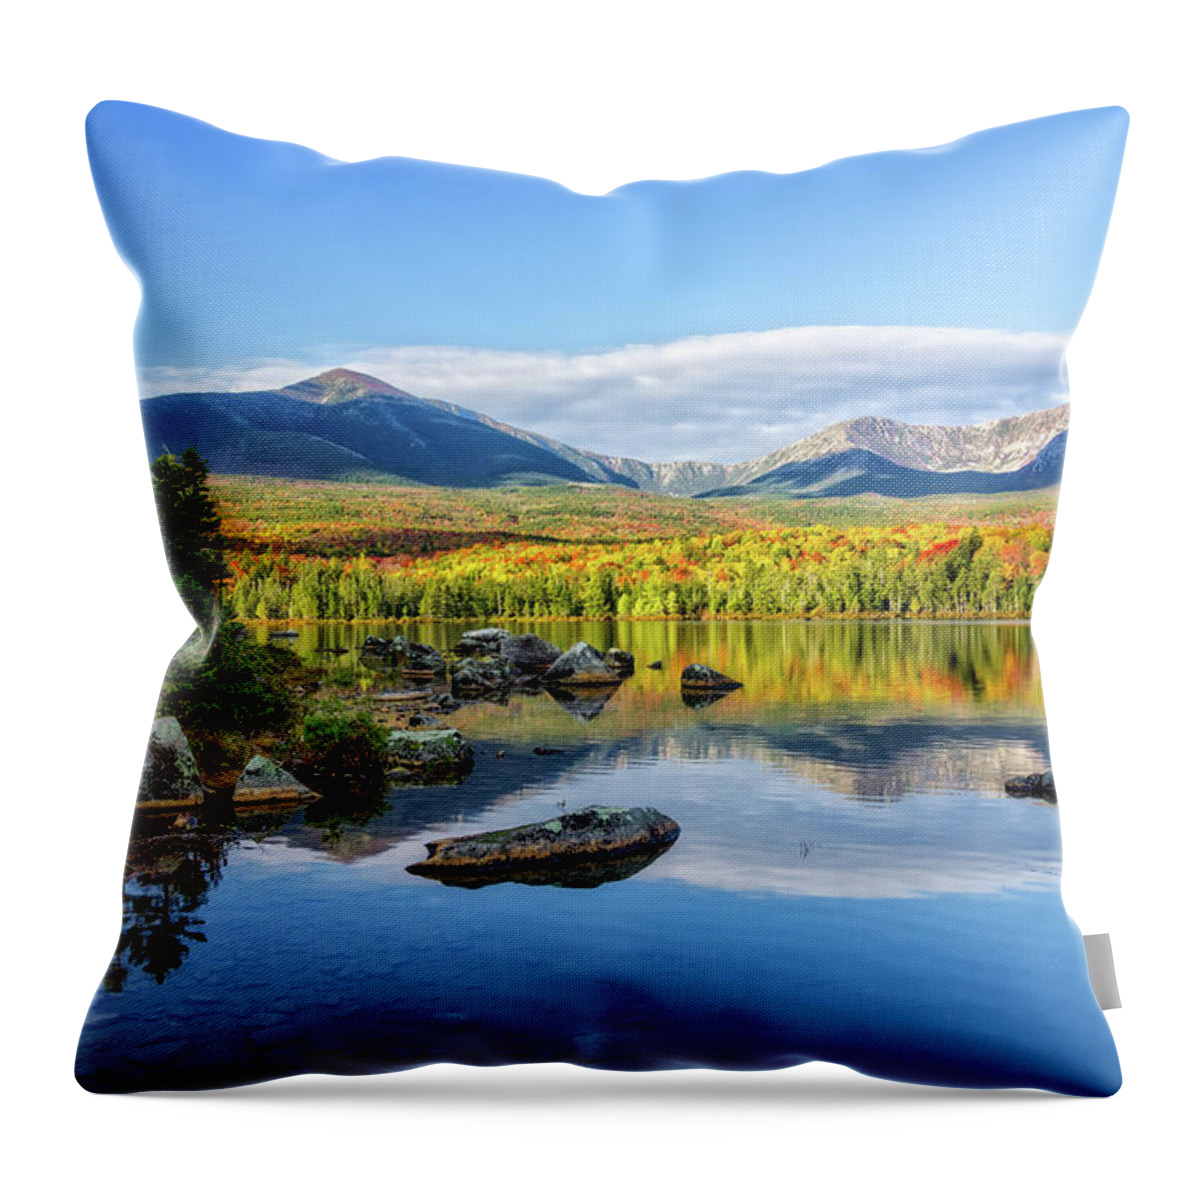 Sandy Stream Pond Me. Throw Pillow featuring the photograph Sandy Stream Pond Baxter SP Maine by Michael Hubley